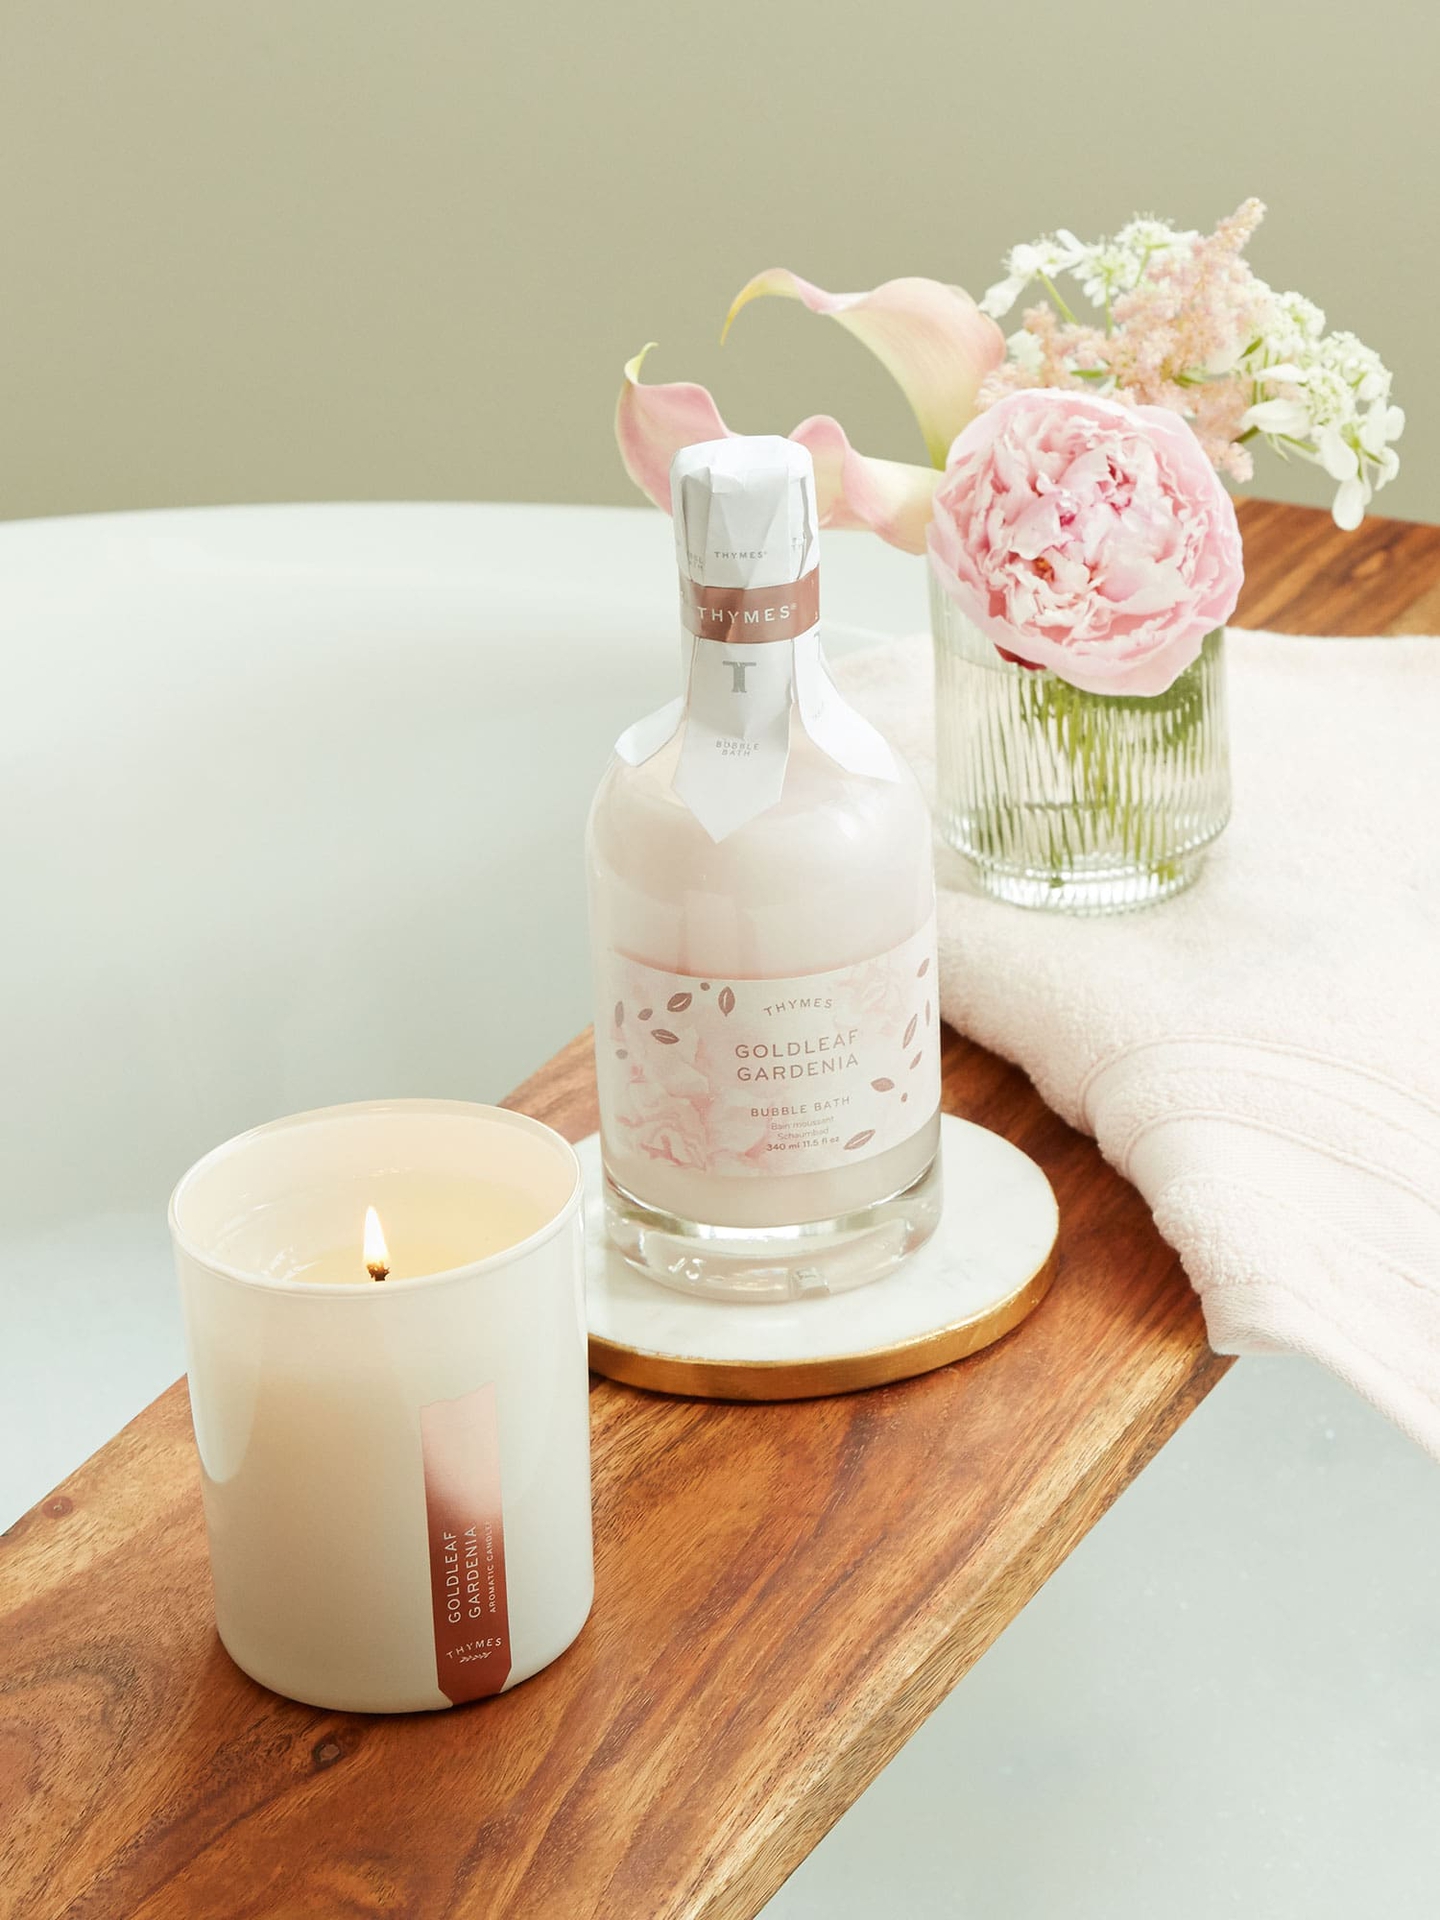 Thymes – Libby Lou's